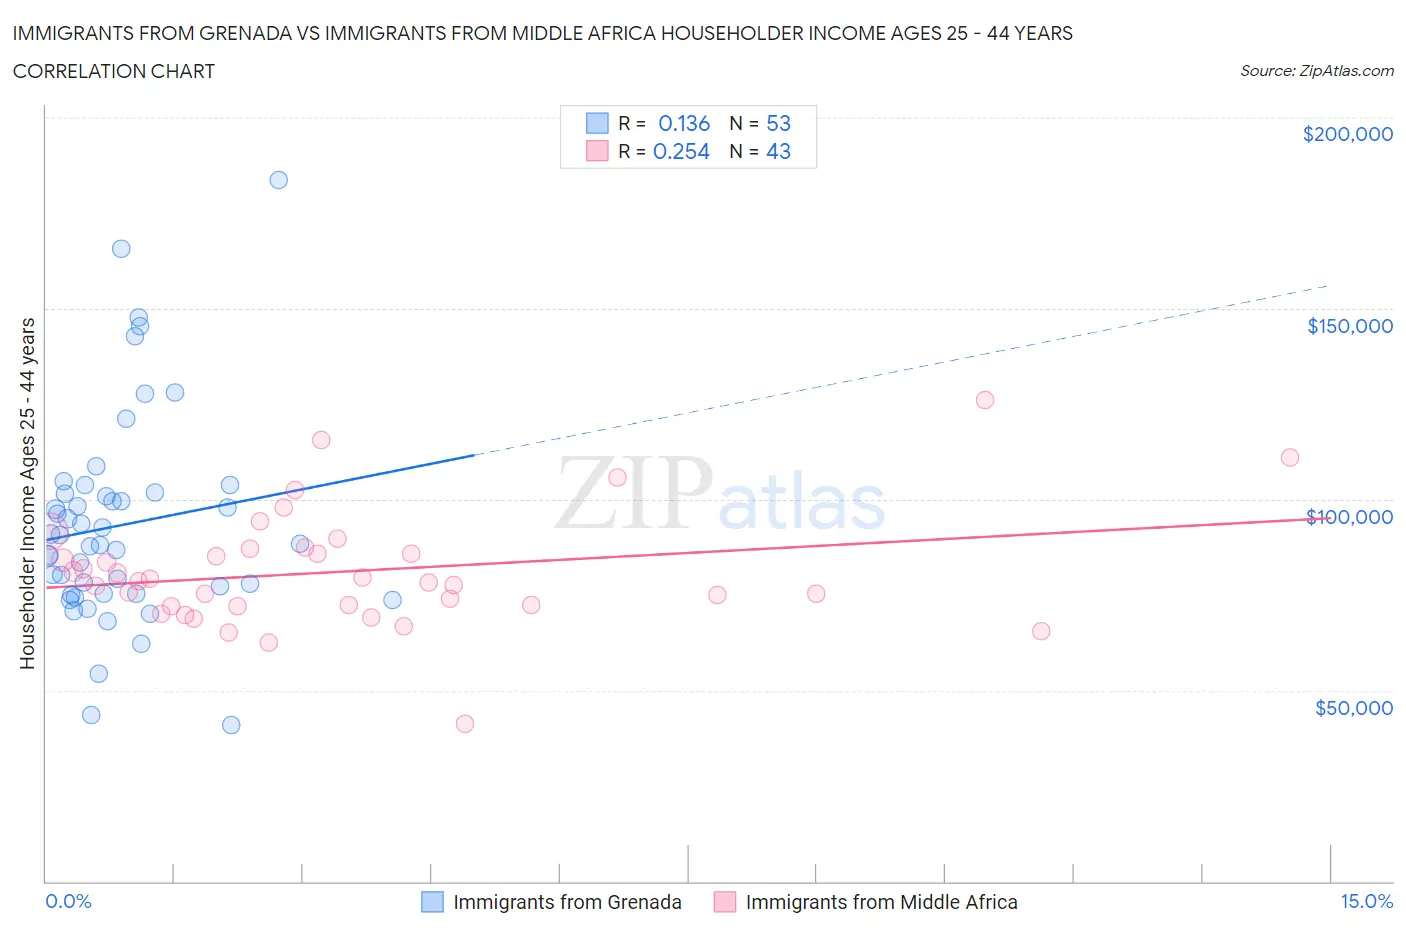 Immigrants from Grenada vs Immigrants from Middle Africa Householder Income Ages 25 - 44 years